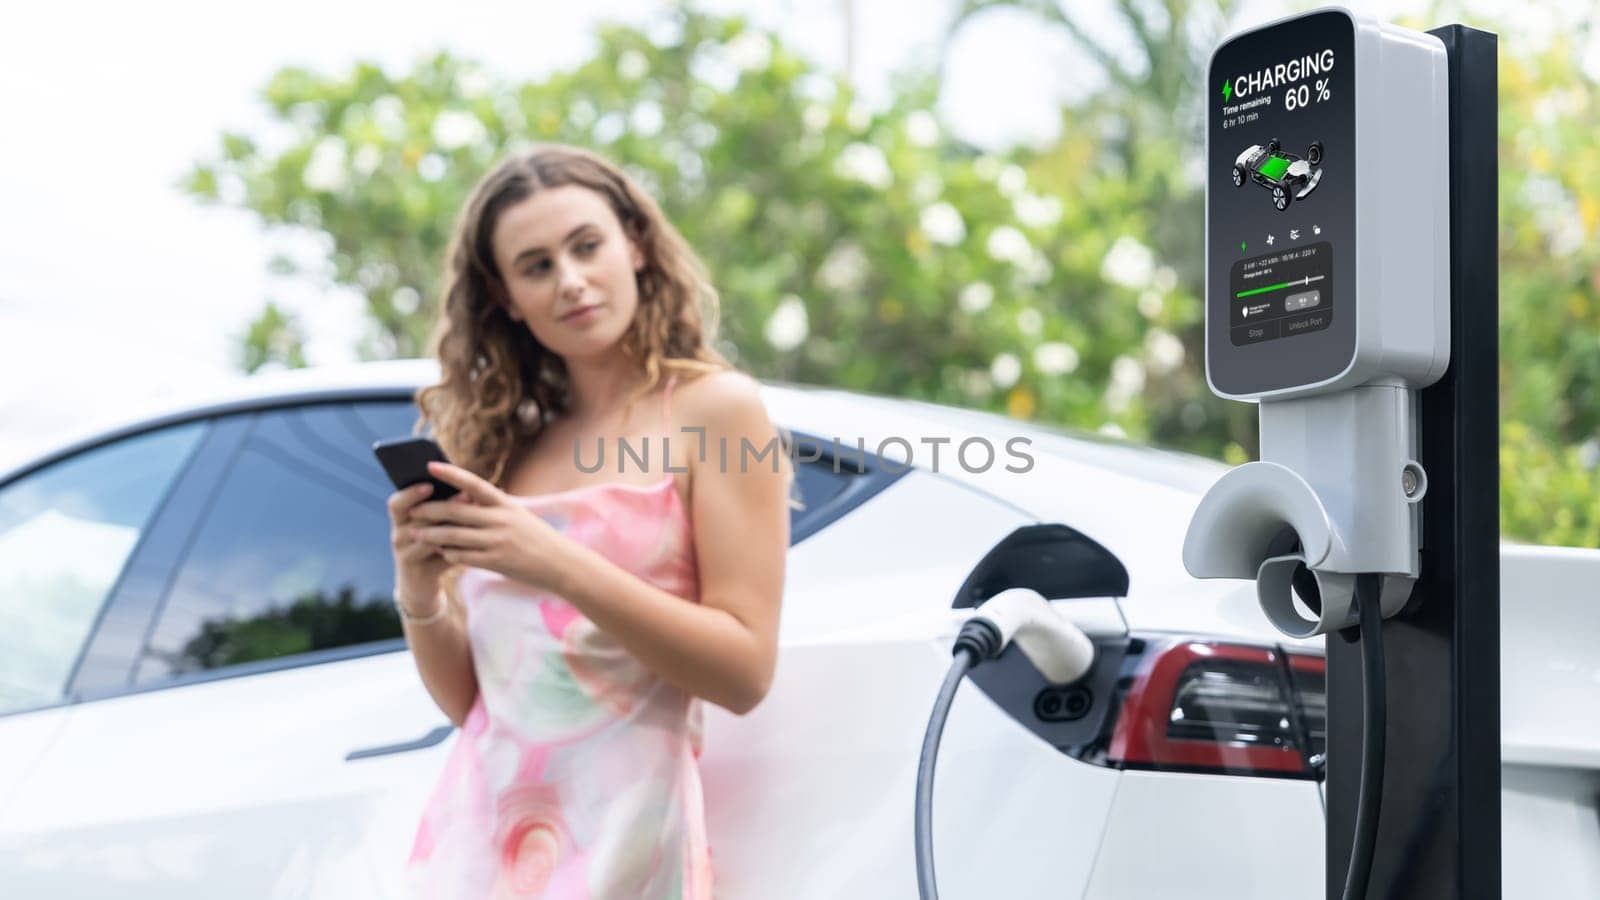 Focused charging station recharging electric vehicle on blurred background of modern woman using smartphone. EV technology utilization for tracking energy usage to optimize battery charging.Synchronos